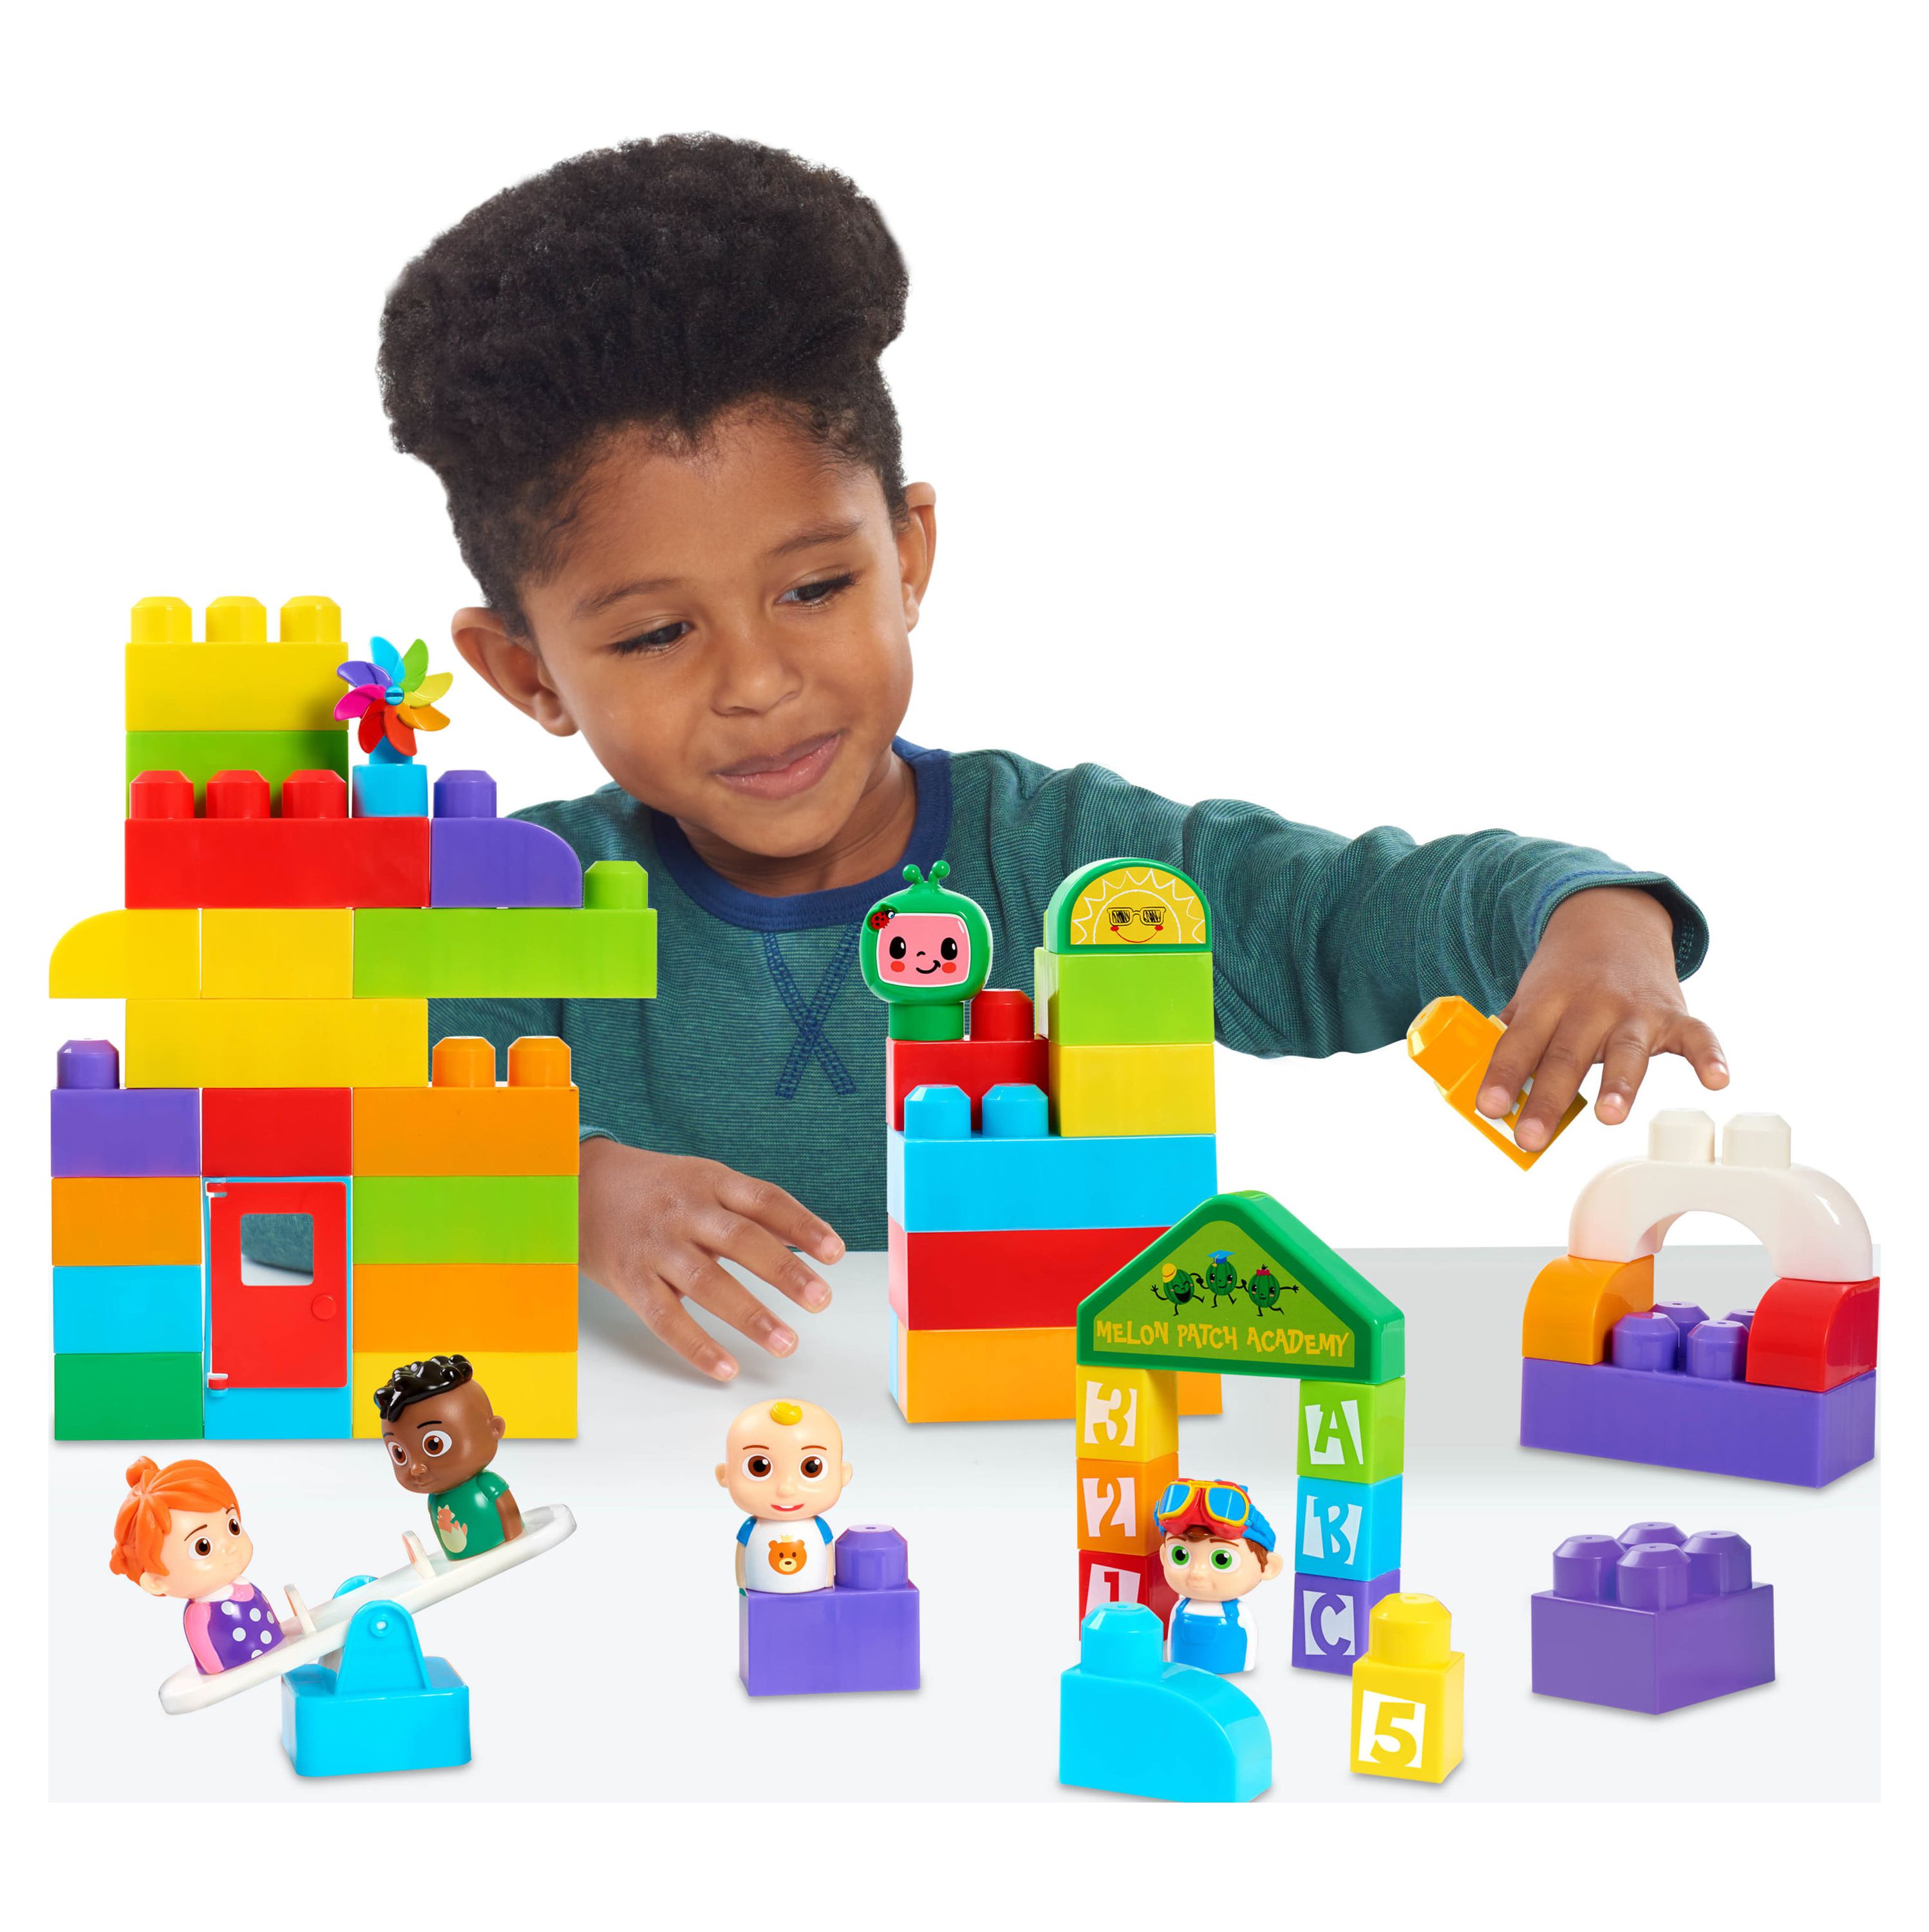 Cocomelon Deluxe Construction Set, Officially Licensed Kids Toys for Ages 18 Month, Gifts and Presents - image 2 of 6